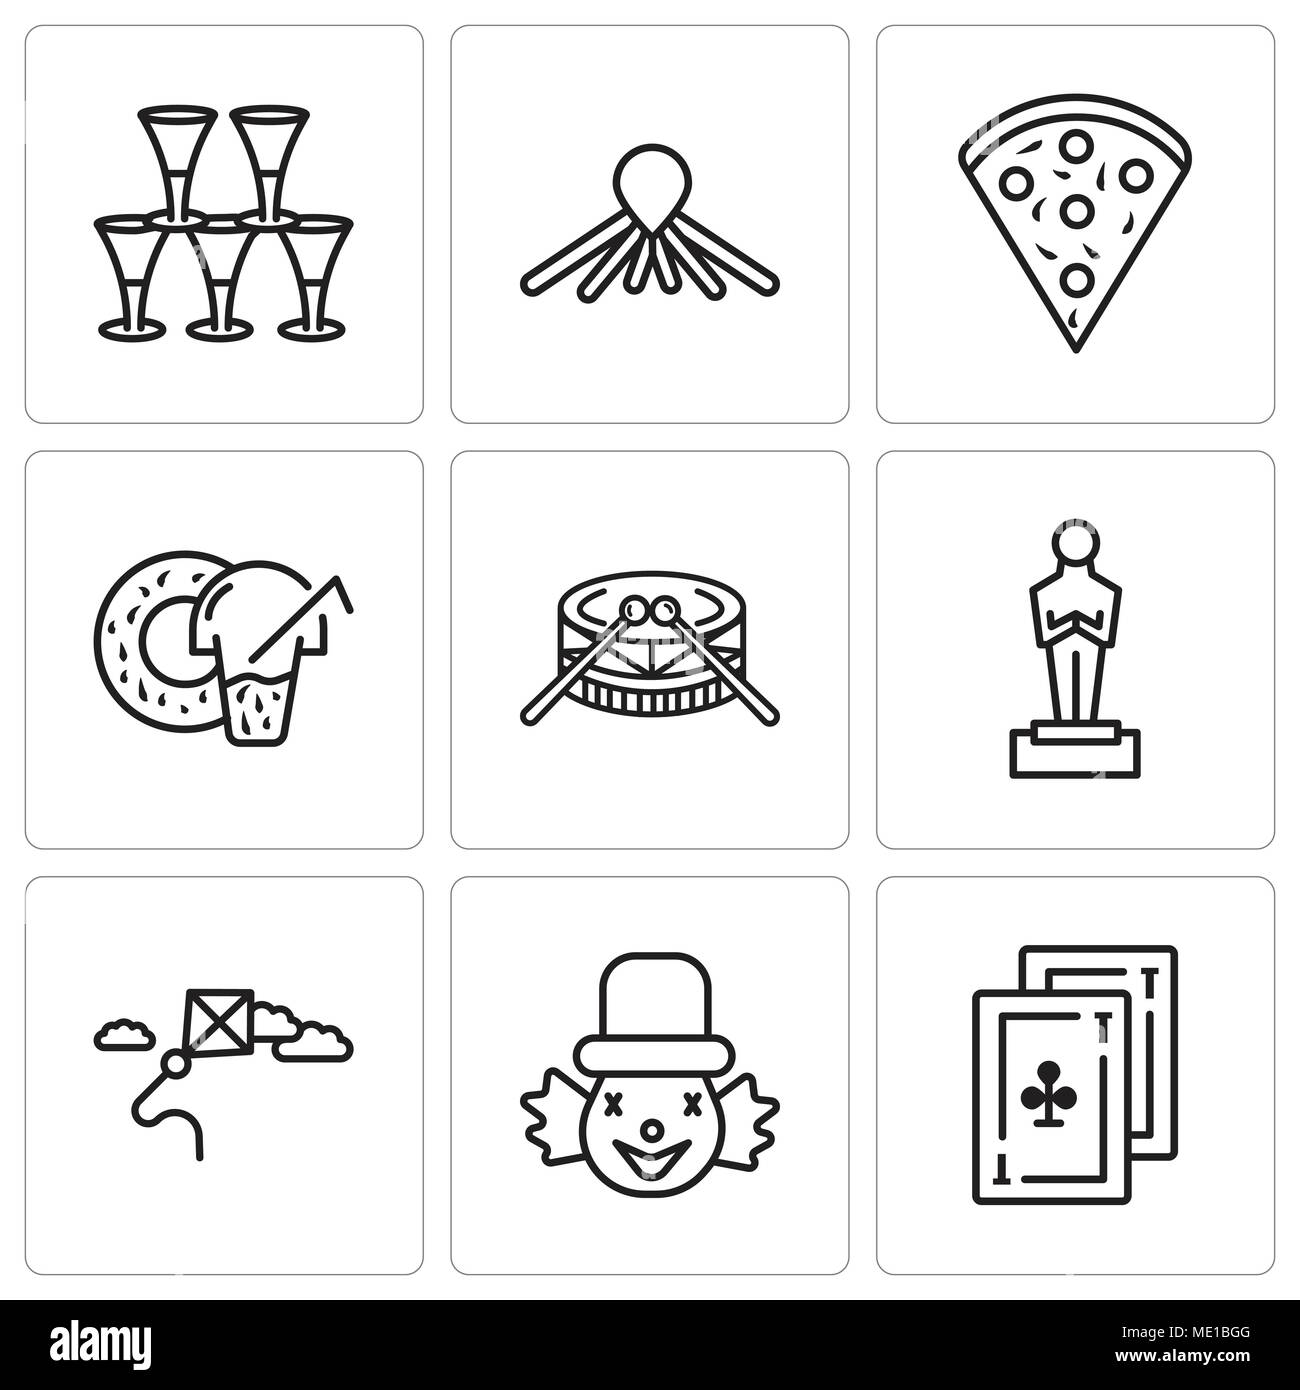 Set Of 9 simple editable icons such as Cards, Clown, Kite, Oscar, Drums, Donut, Confetti, Balloon dog, Glasses, can be used for mobile, web UI Stock Vector